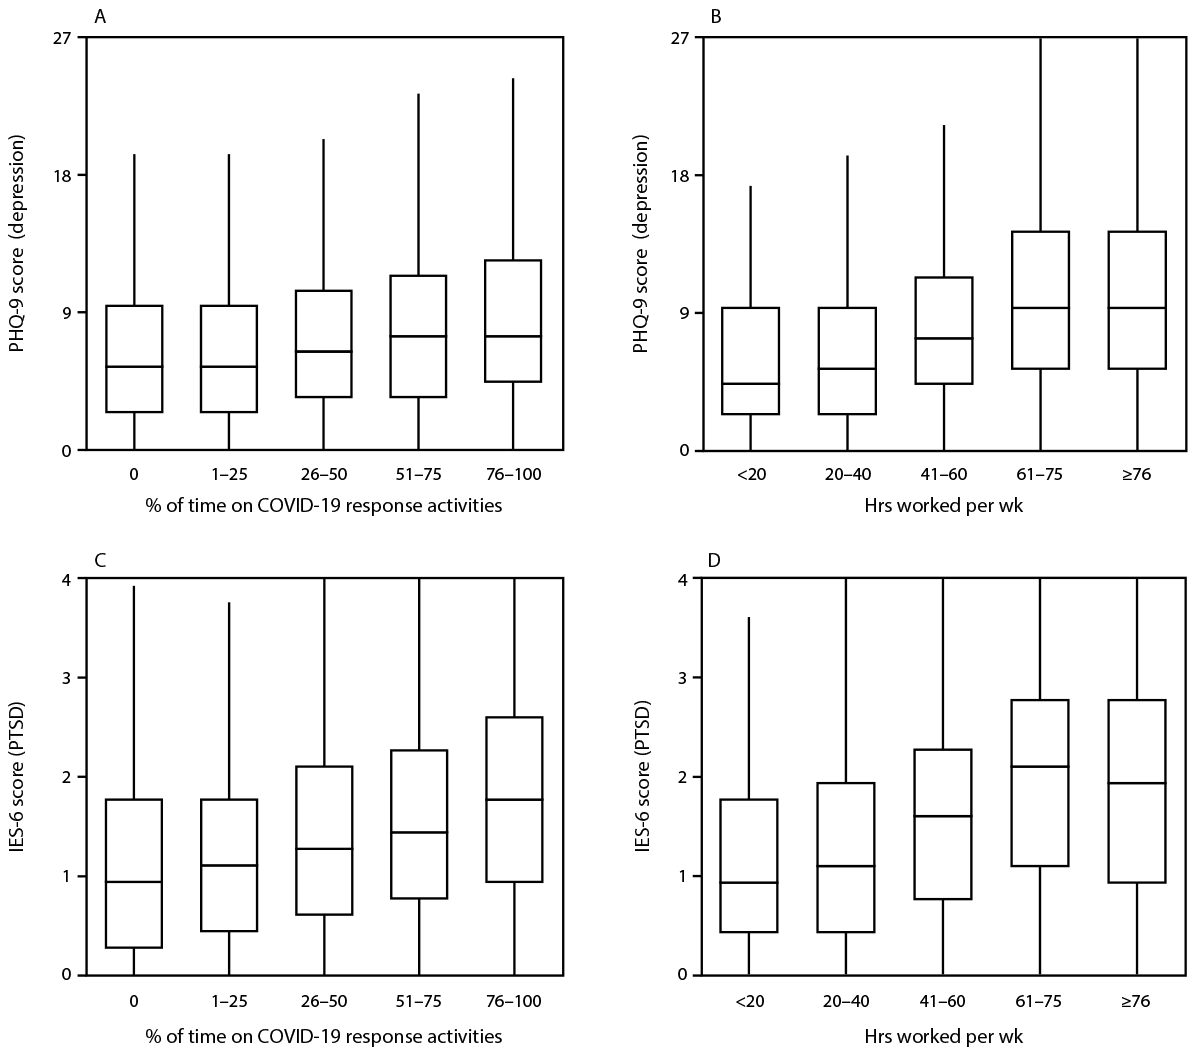 Figure is a box and whisker plot showing distribution of depression and PTSD scores among U.S. public health workers directly involved in COVID-19 response during March 2020–April 2021.